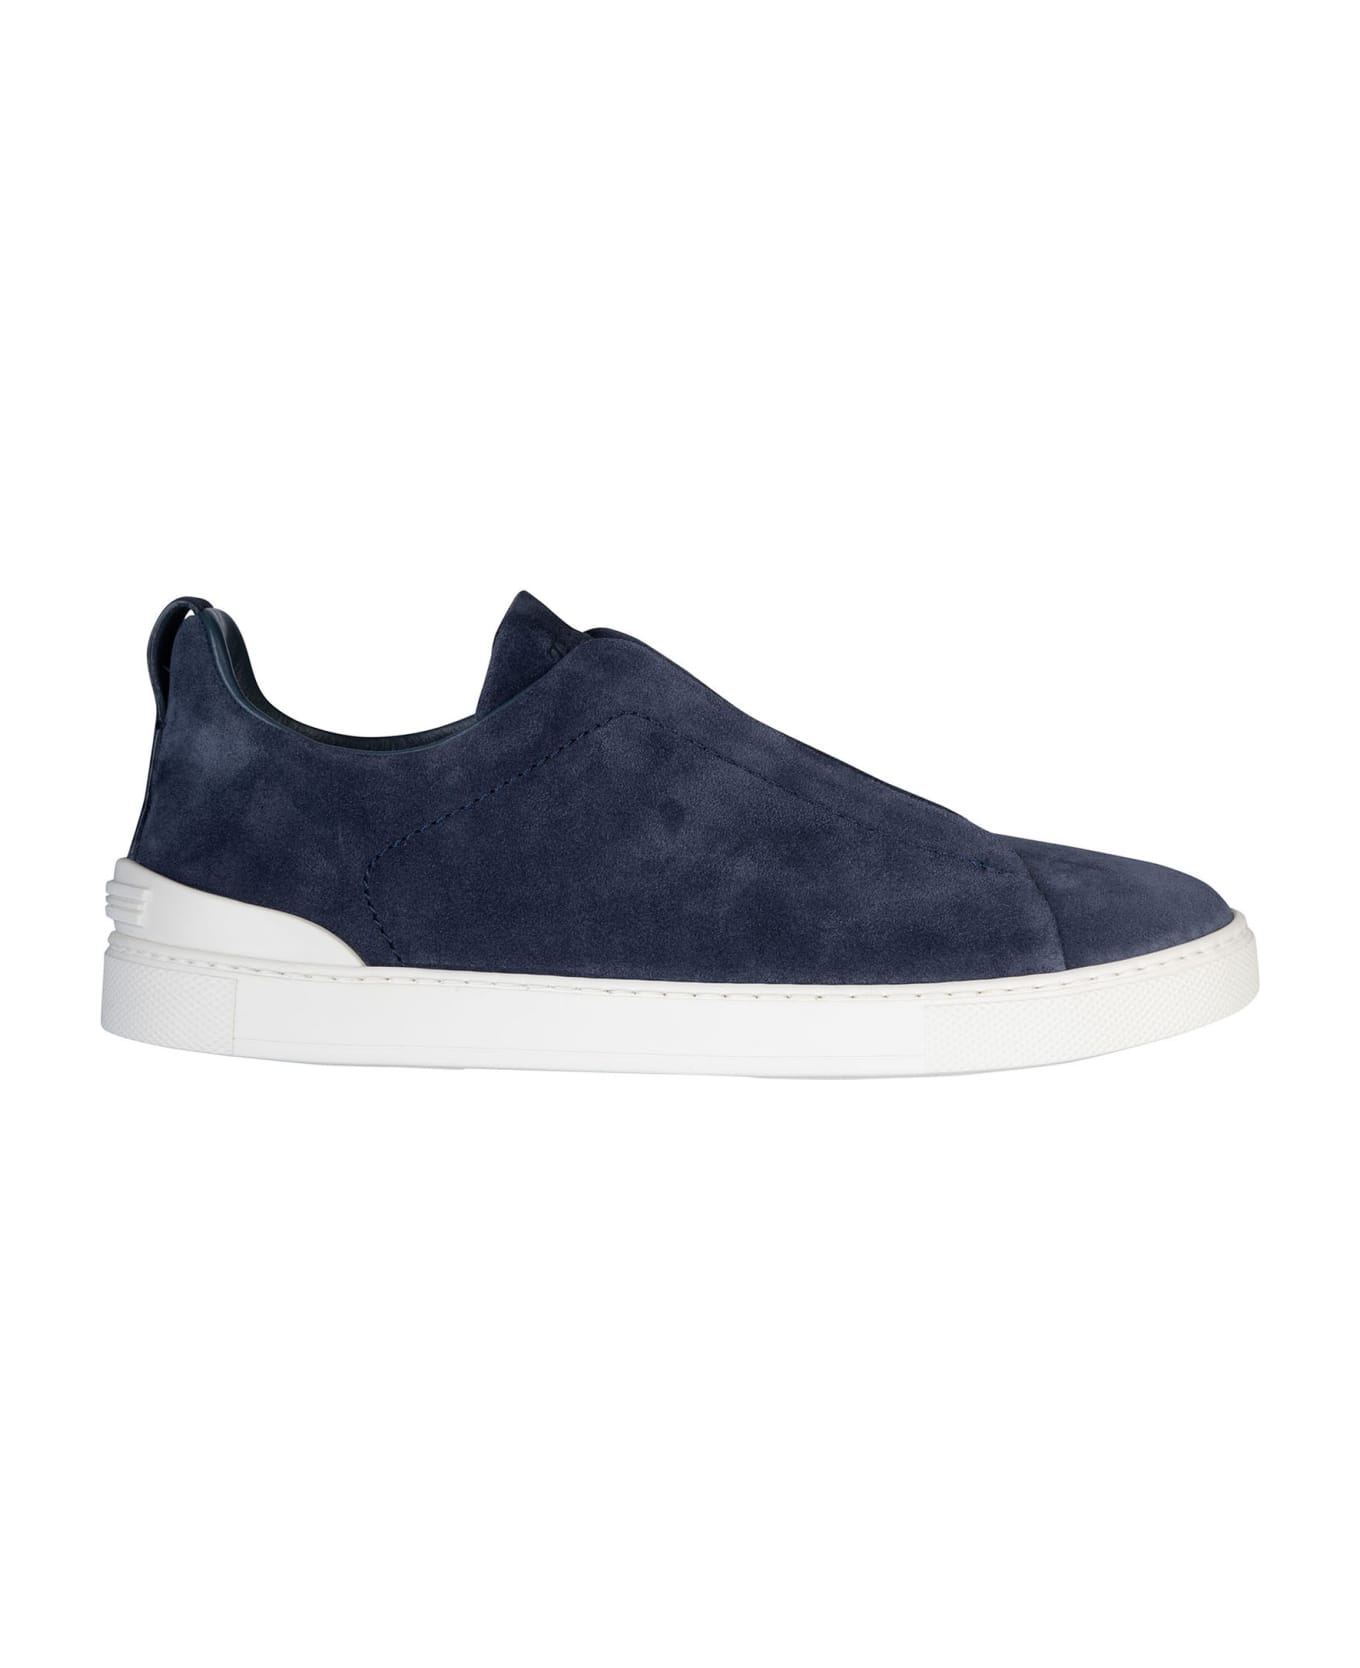 Zegna Triple Stretch Low Top Sneakers